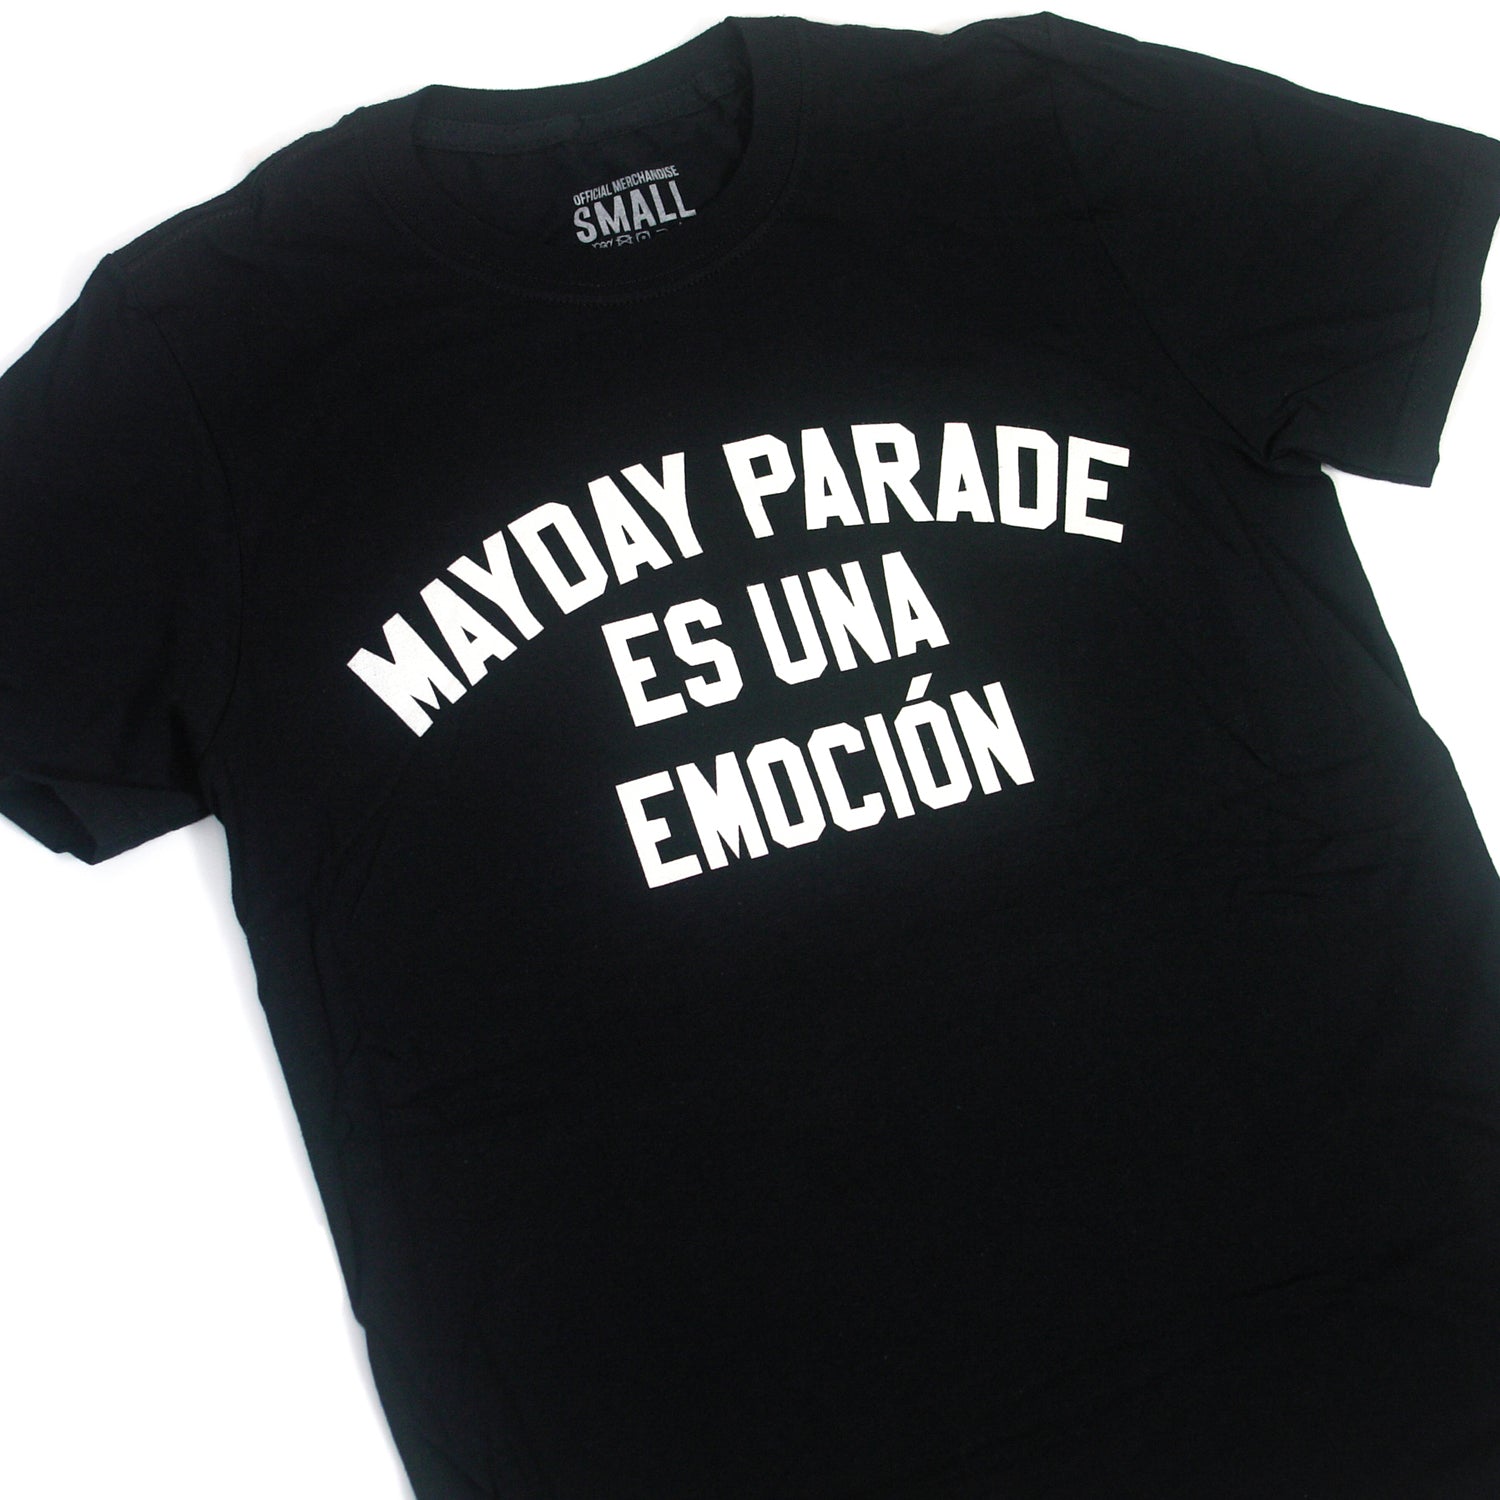 close up image of a black tee shirt on a white background. tee has white print on the center chest that says mayday parade es una emocion